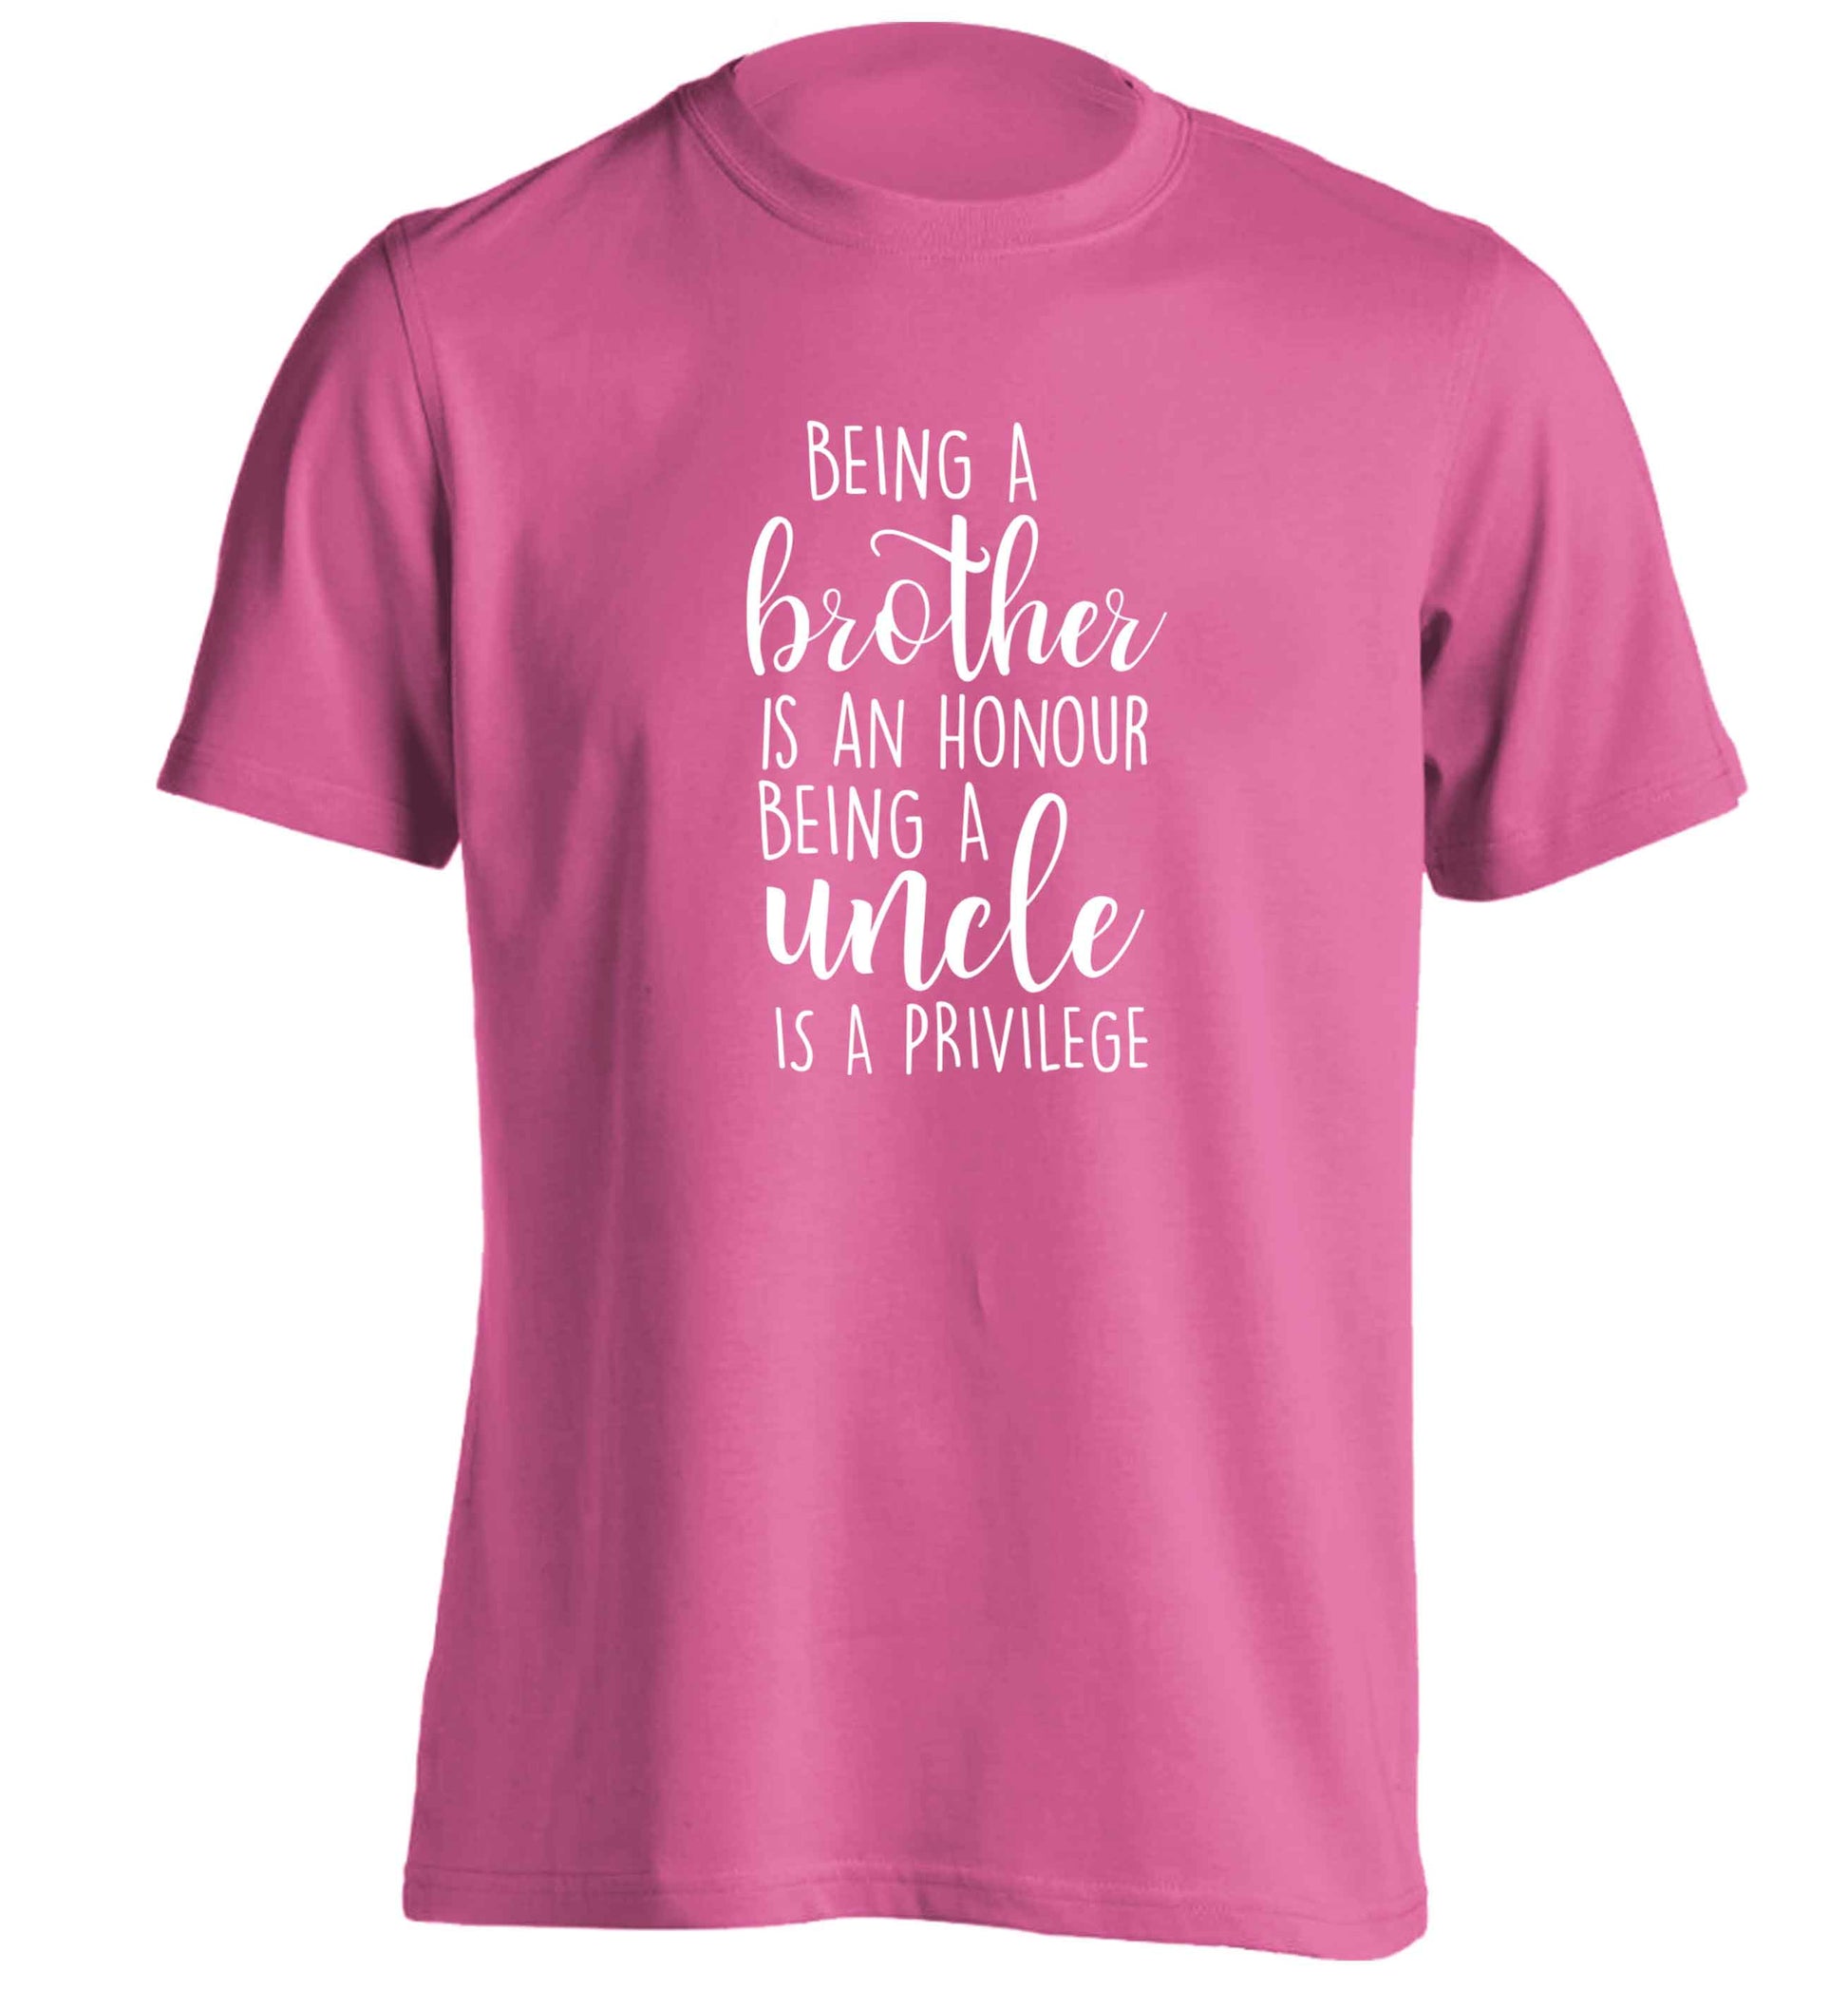 Being a brother is an honour being an uncle is a privilege adults unisex pink Tshirt 2XL